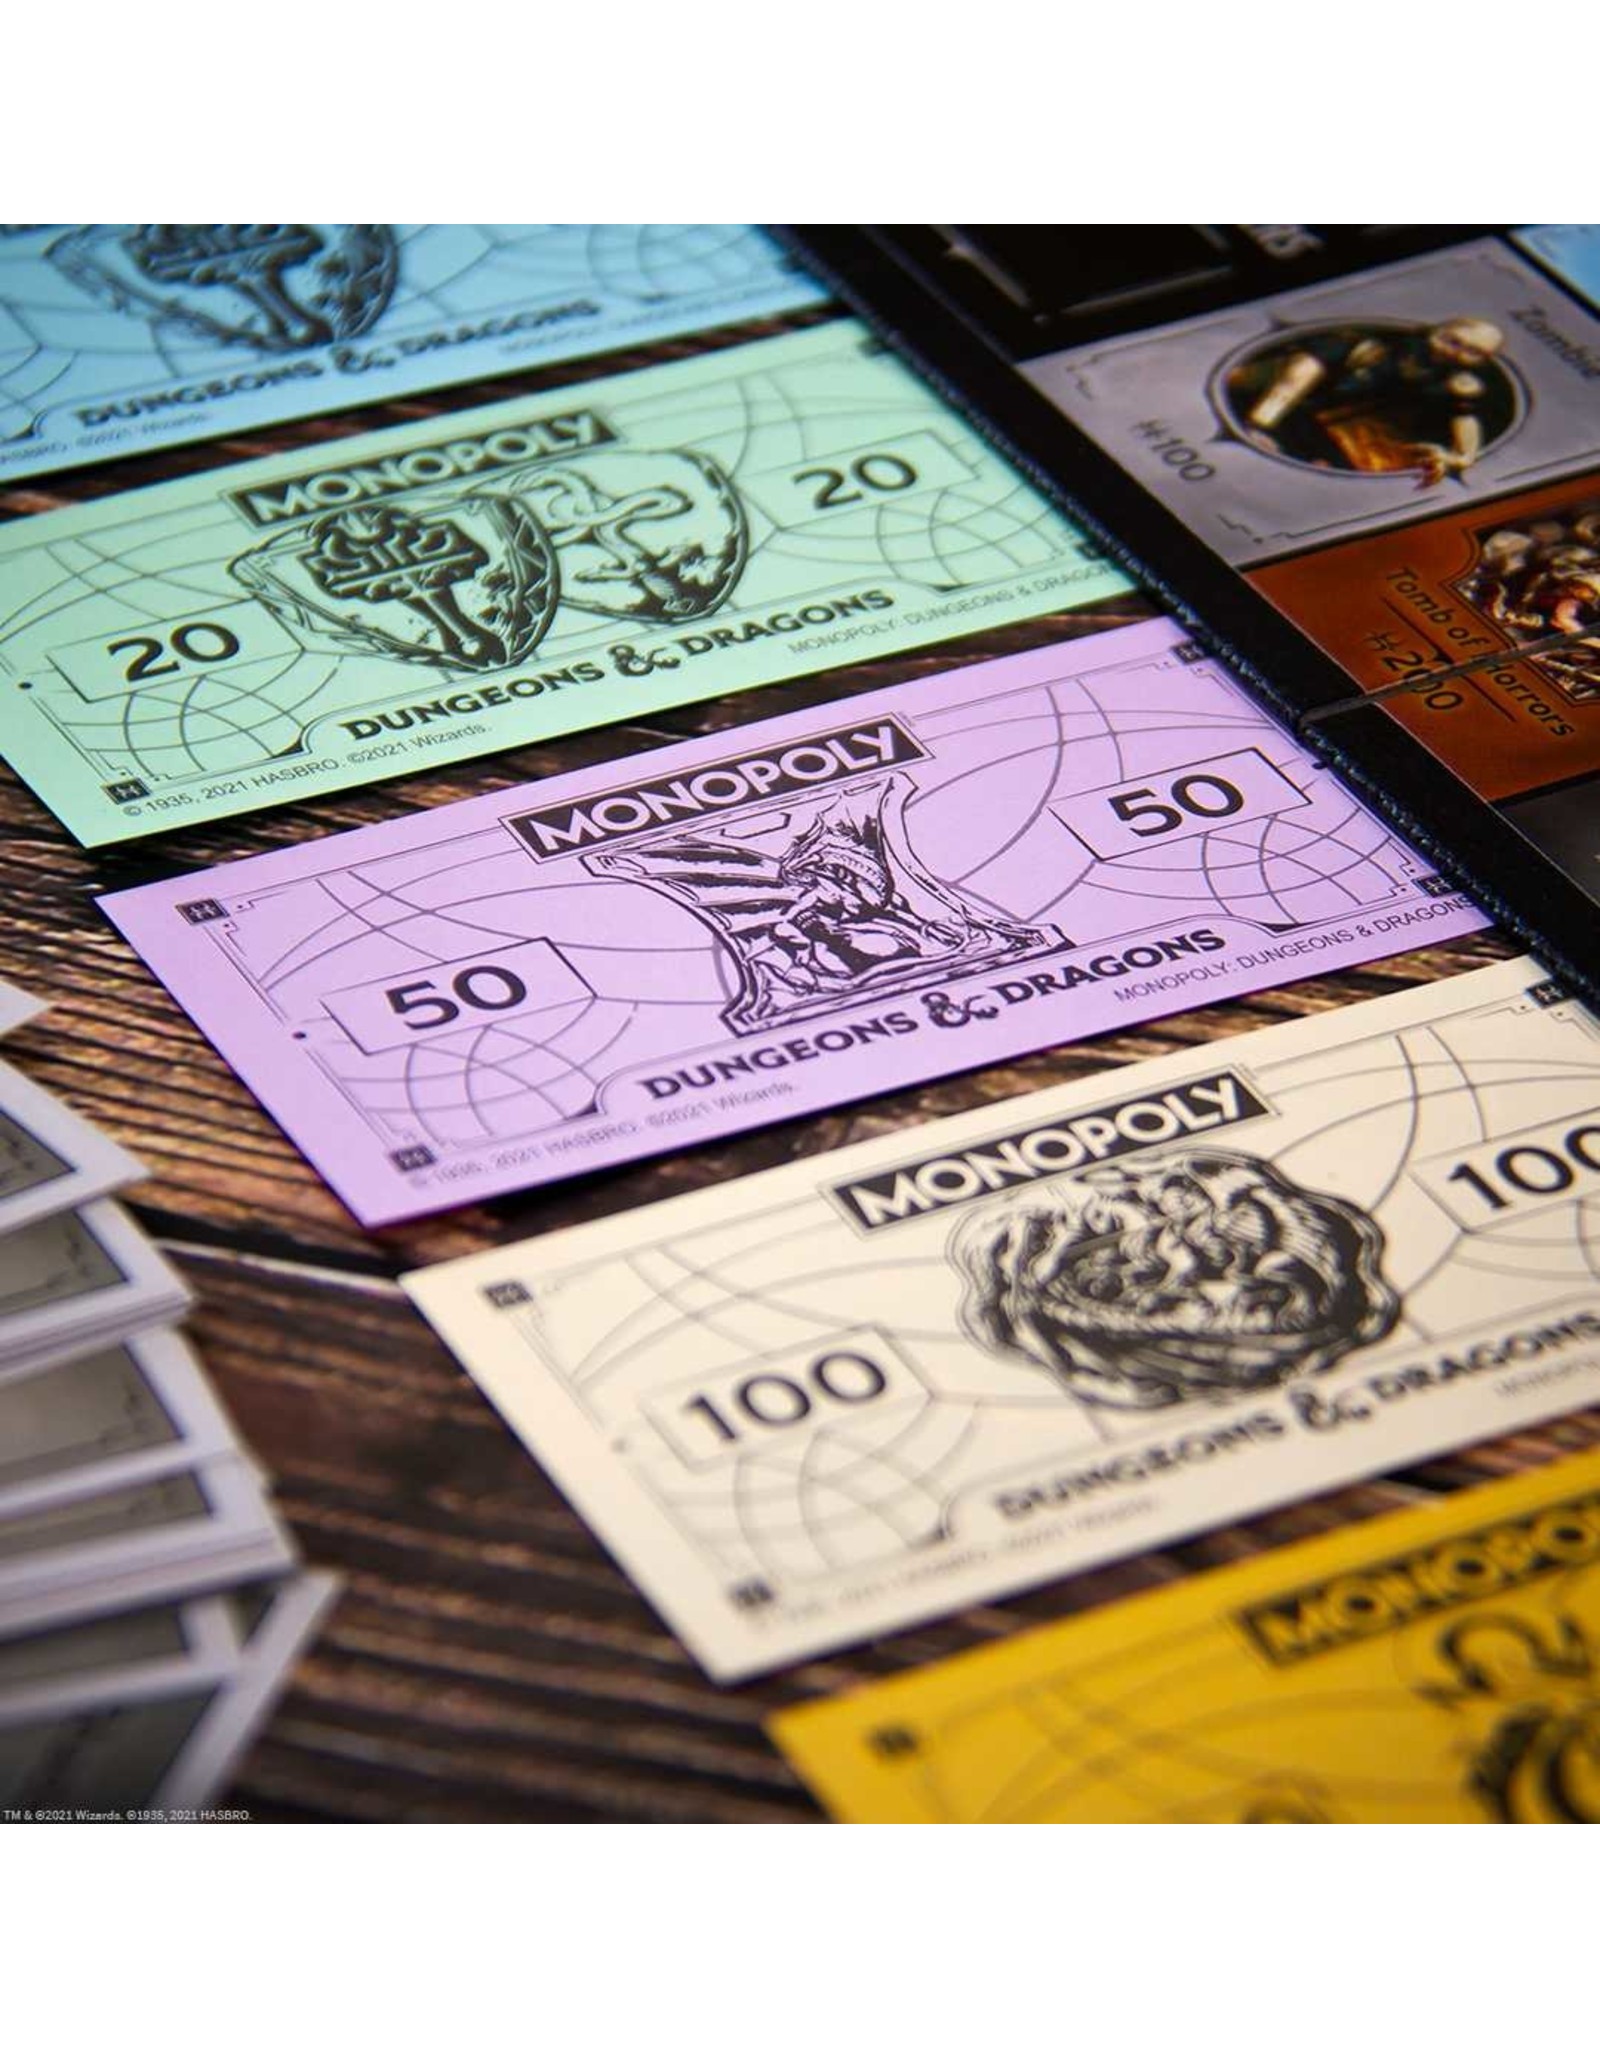 USAopoly Monopoly D&D